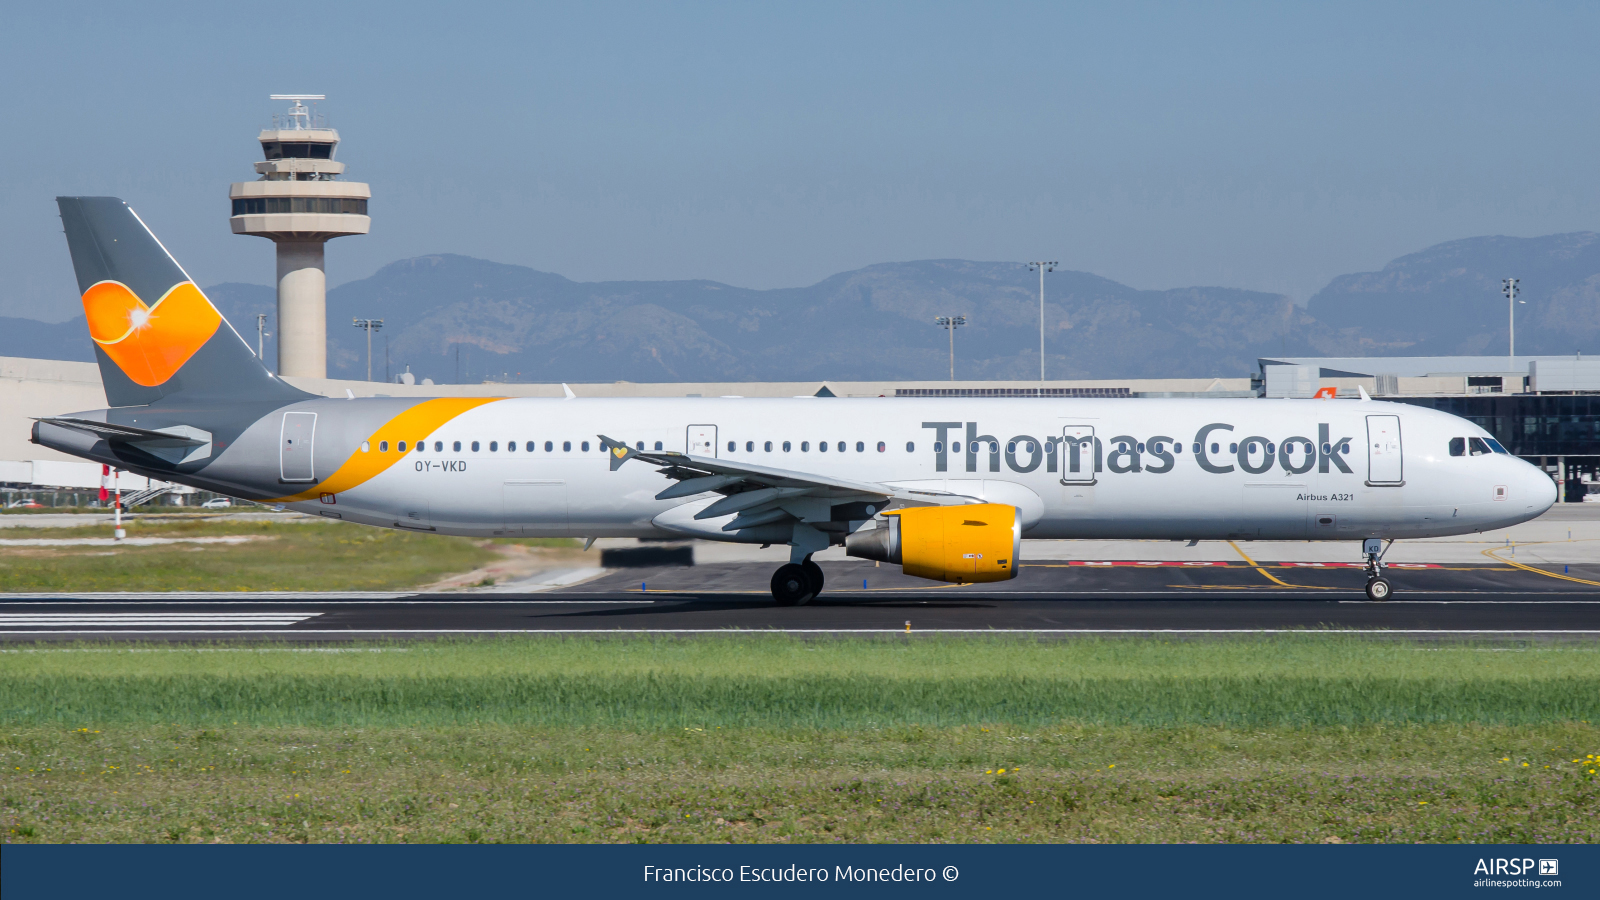 Thomas Cook Airlines  Airbus A321  OY-VKD